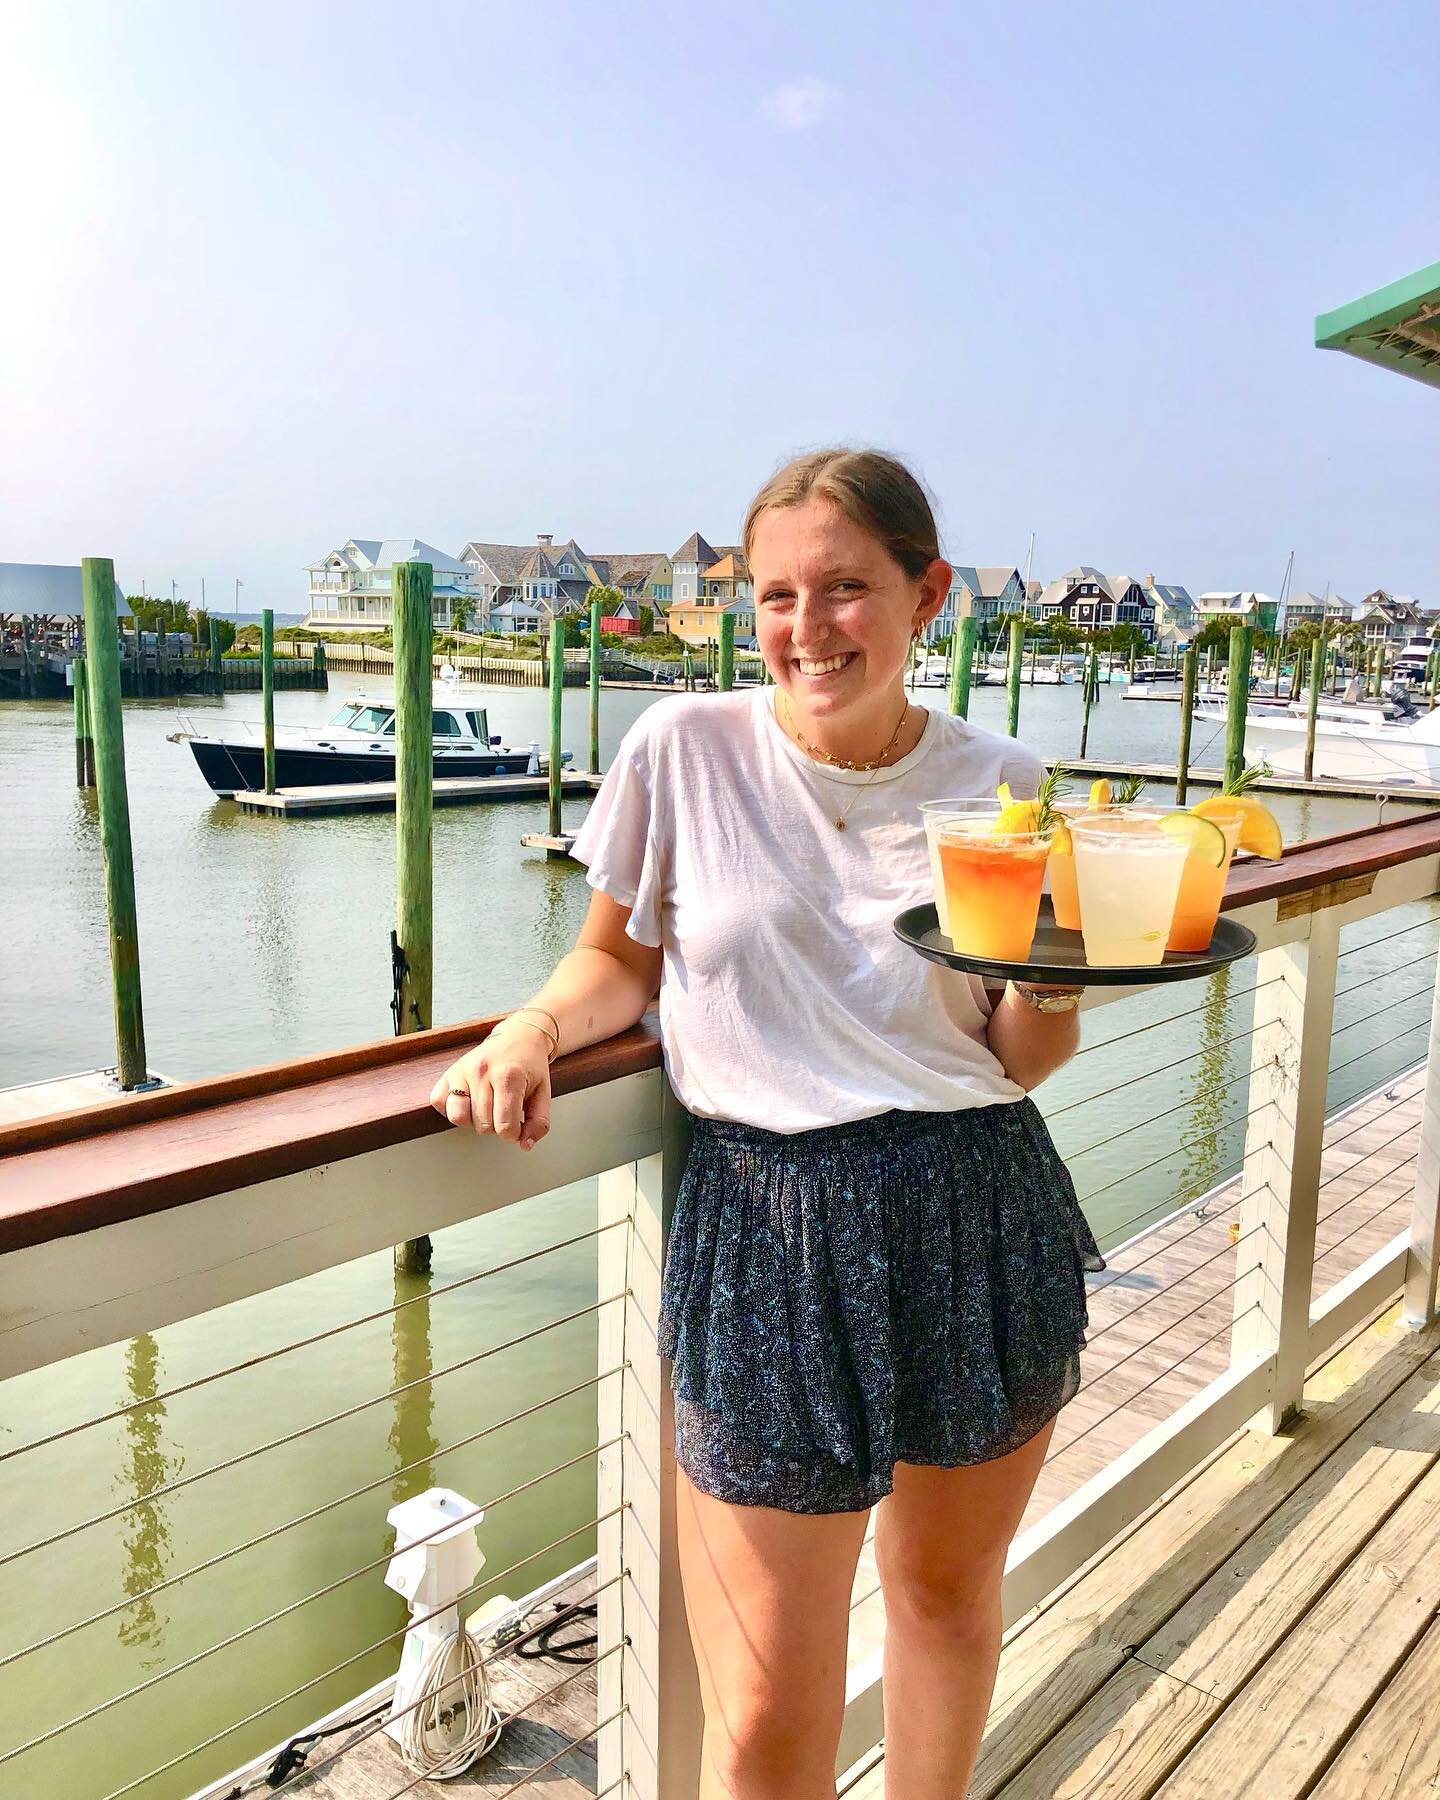 Swipe for the exciting details of your future evening on Bald Head Island, at the Wisp! Our new server Abigail is awaiting your reservation as well as the full bar and @delphinacantina pizza!! #nightout #baldheadisland #trivia #bingo #cocktails #mock